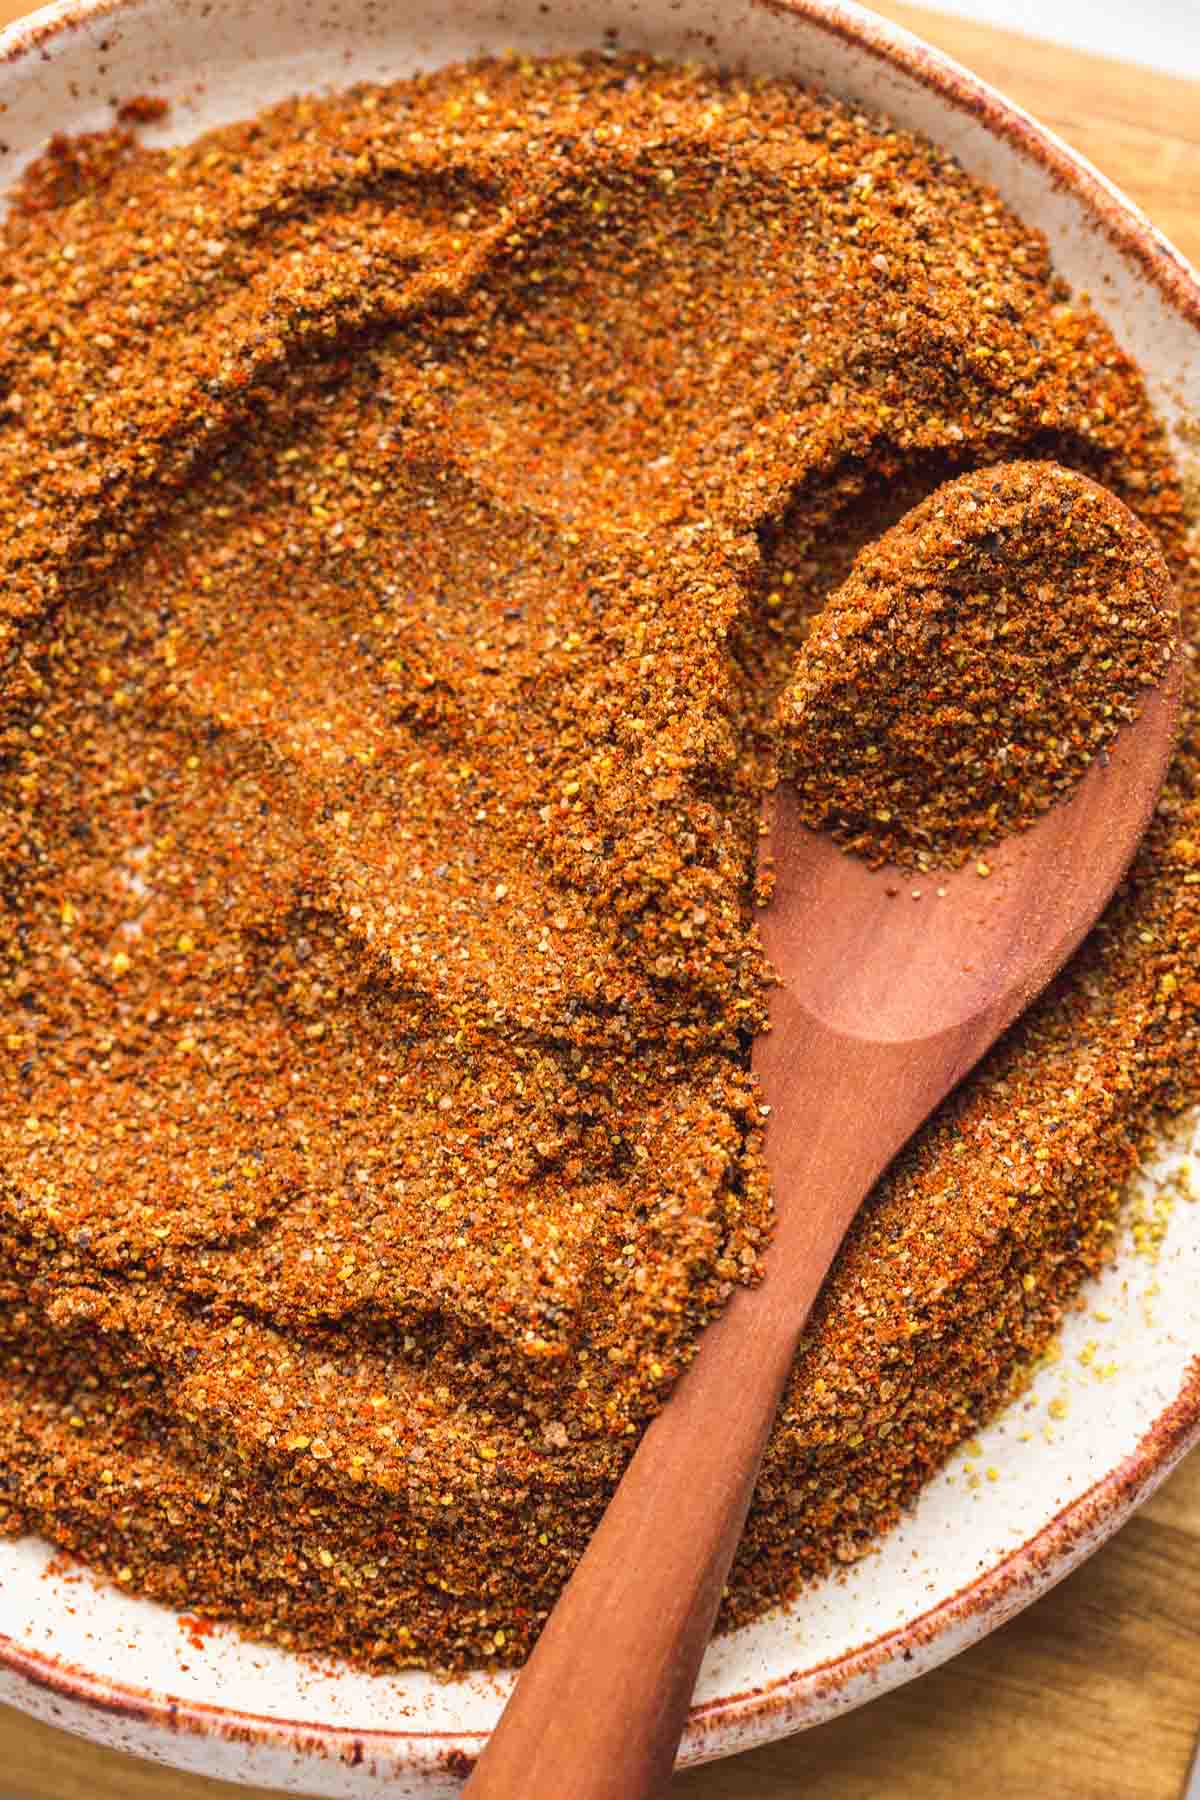 A close up of Old bay seasoning on a small plate with a wooden spoon